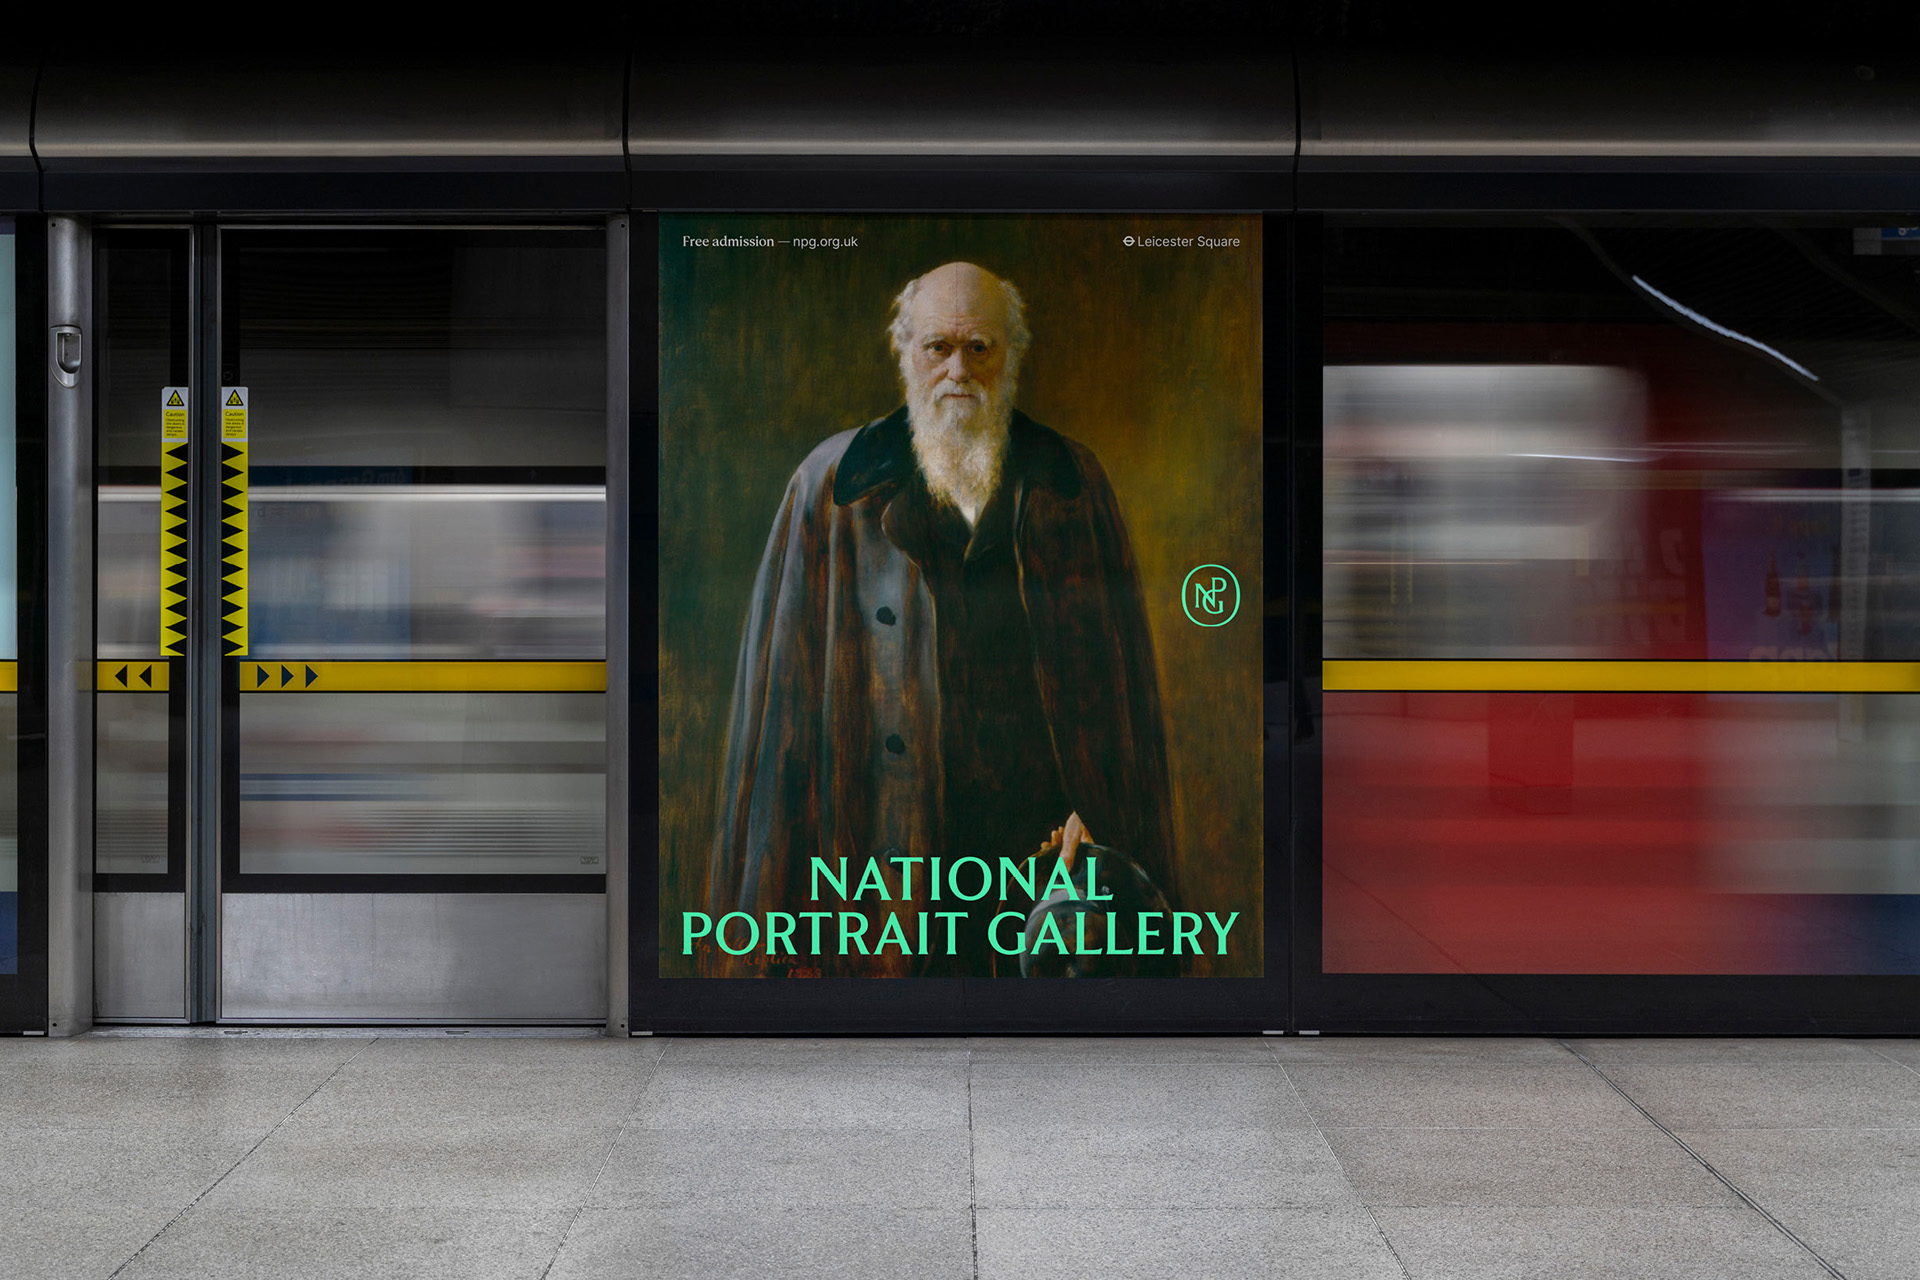 An advert for the National Portrait Gallery as a tube whizzes past